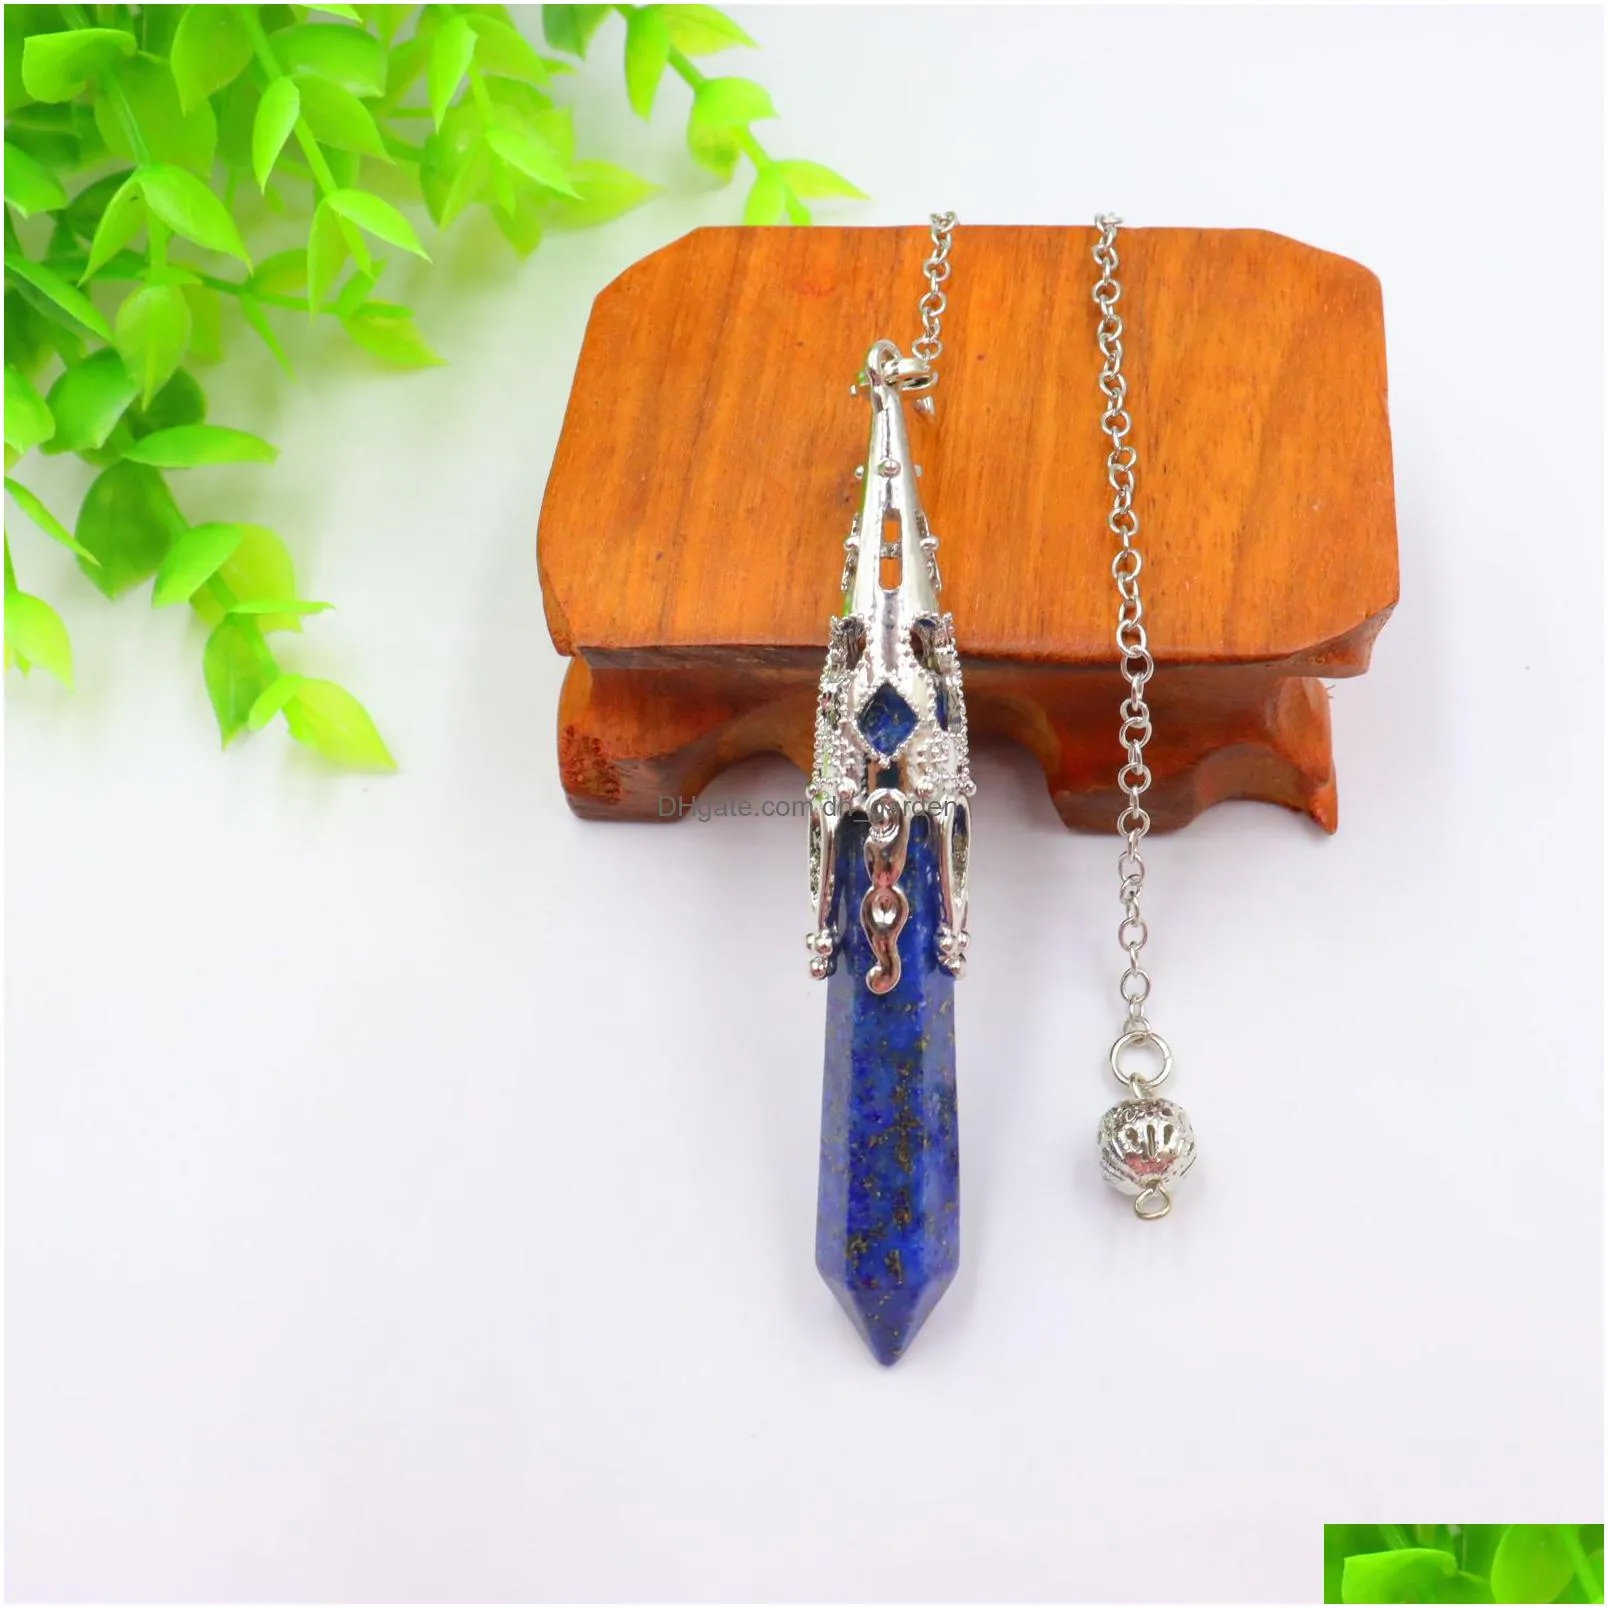 natural stone pendulum charms hexagonal prism shaped pendant link chain for divination crystal jewelry charm amulet healing pendant